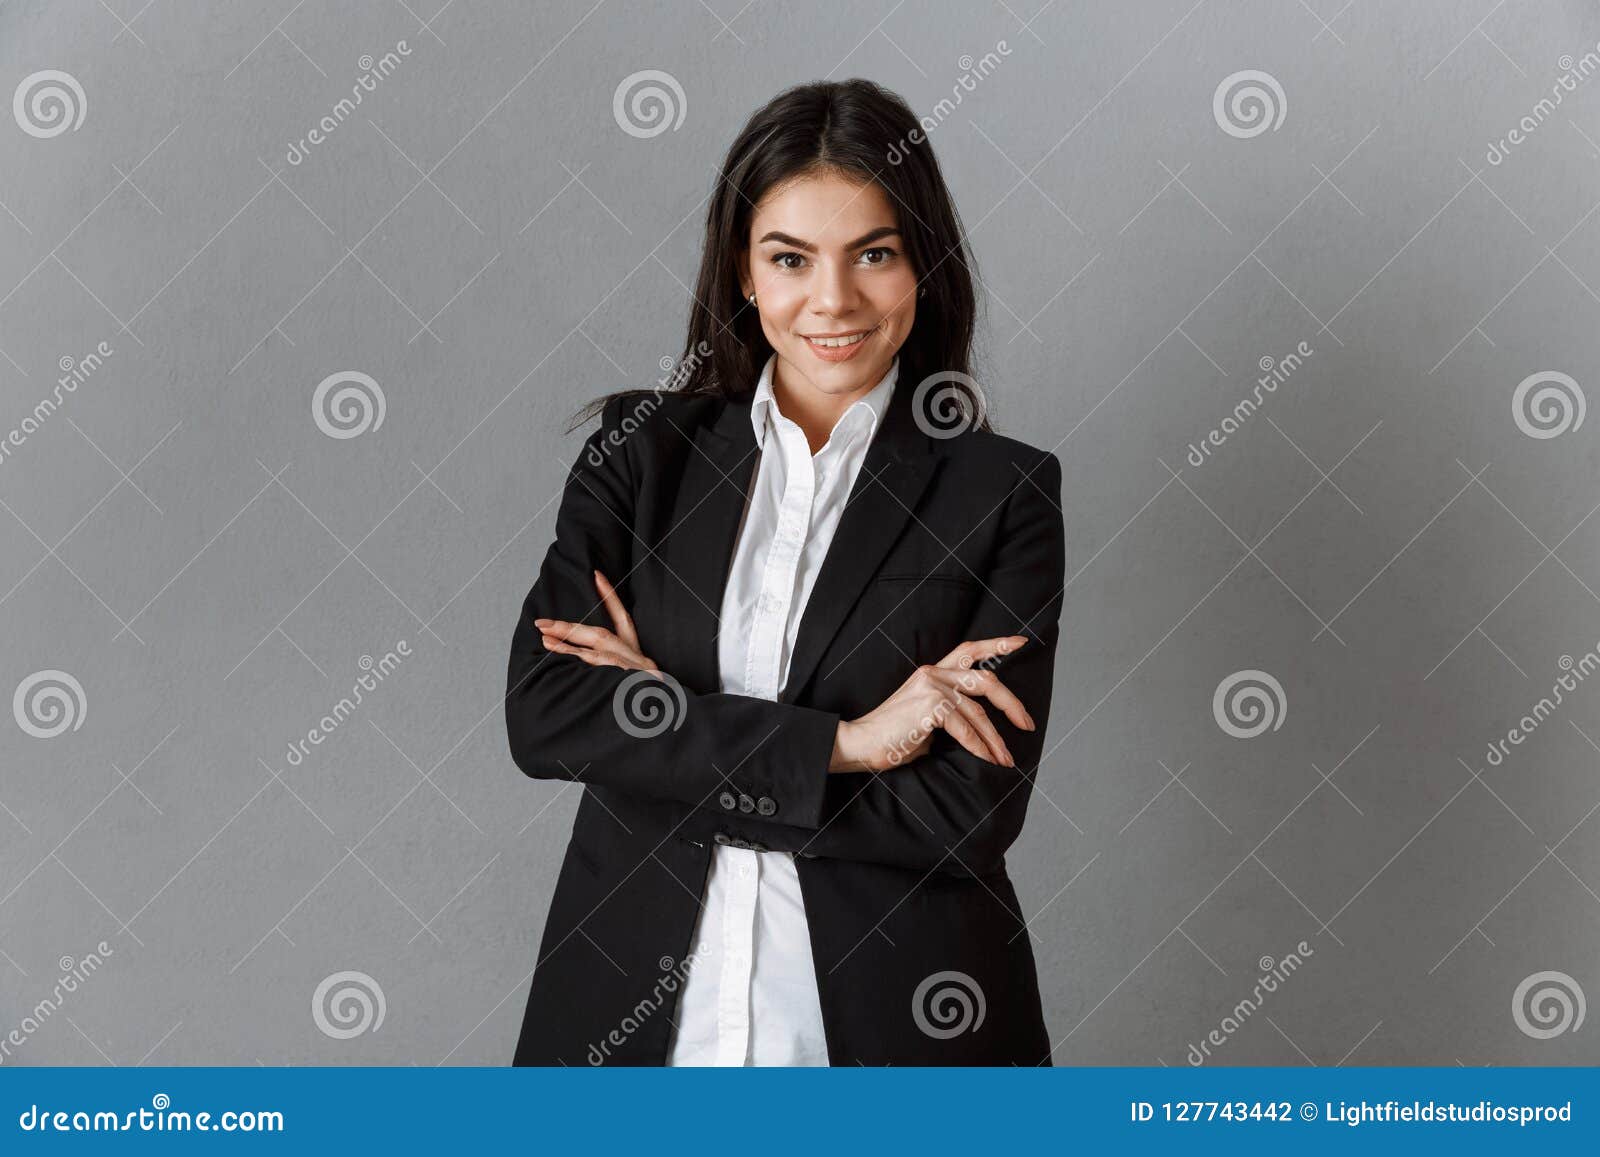 Portrait of Smiling Businesswoman in Suit with Arms Crossed Against ...